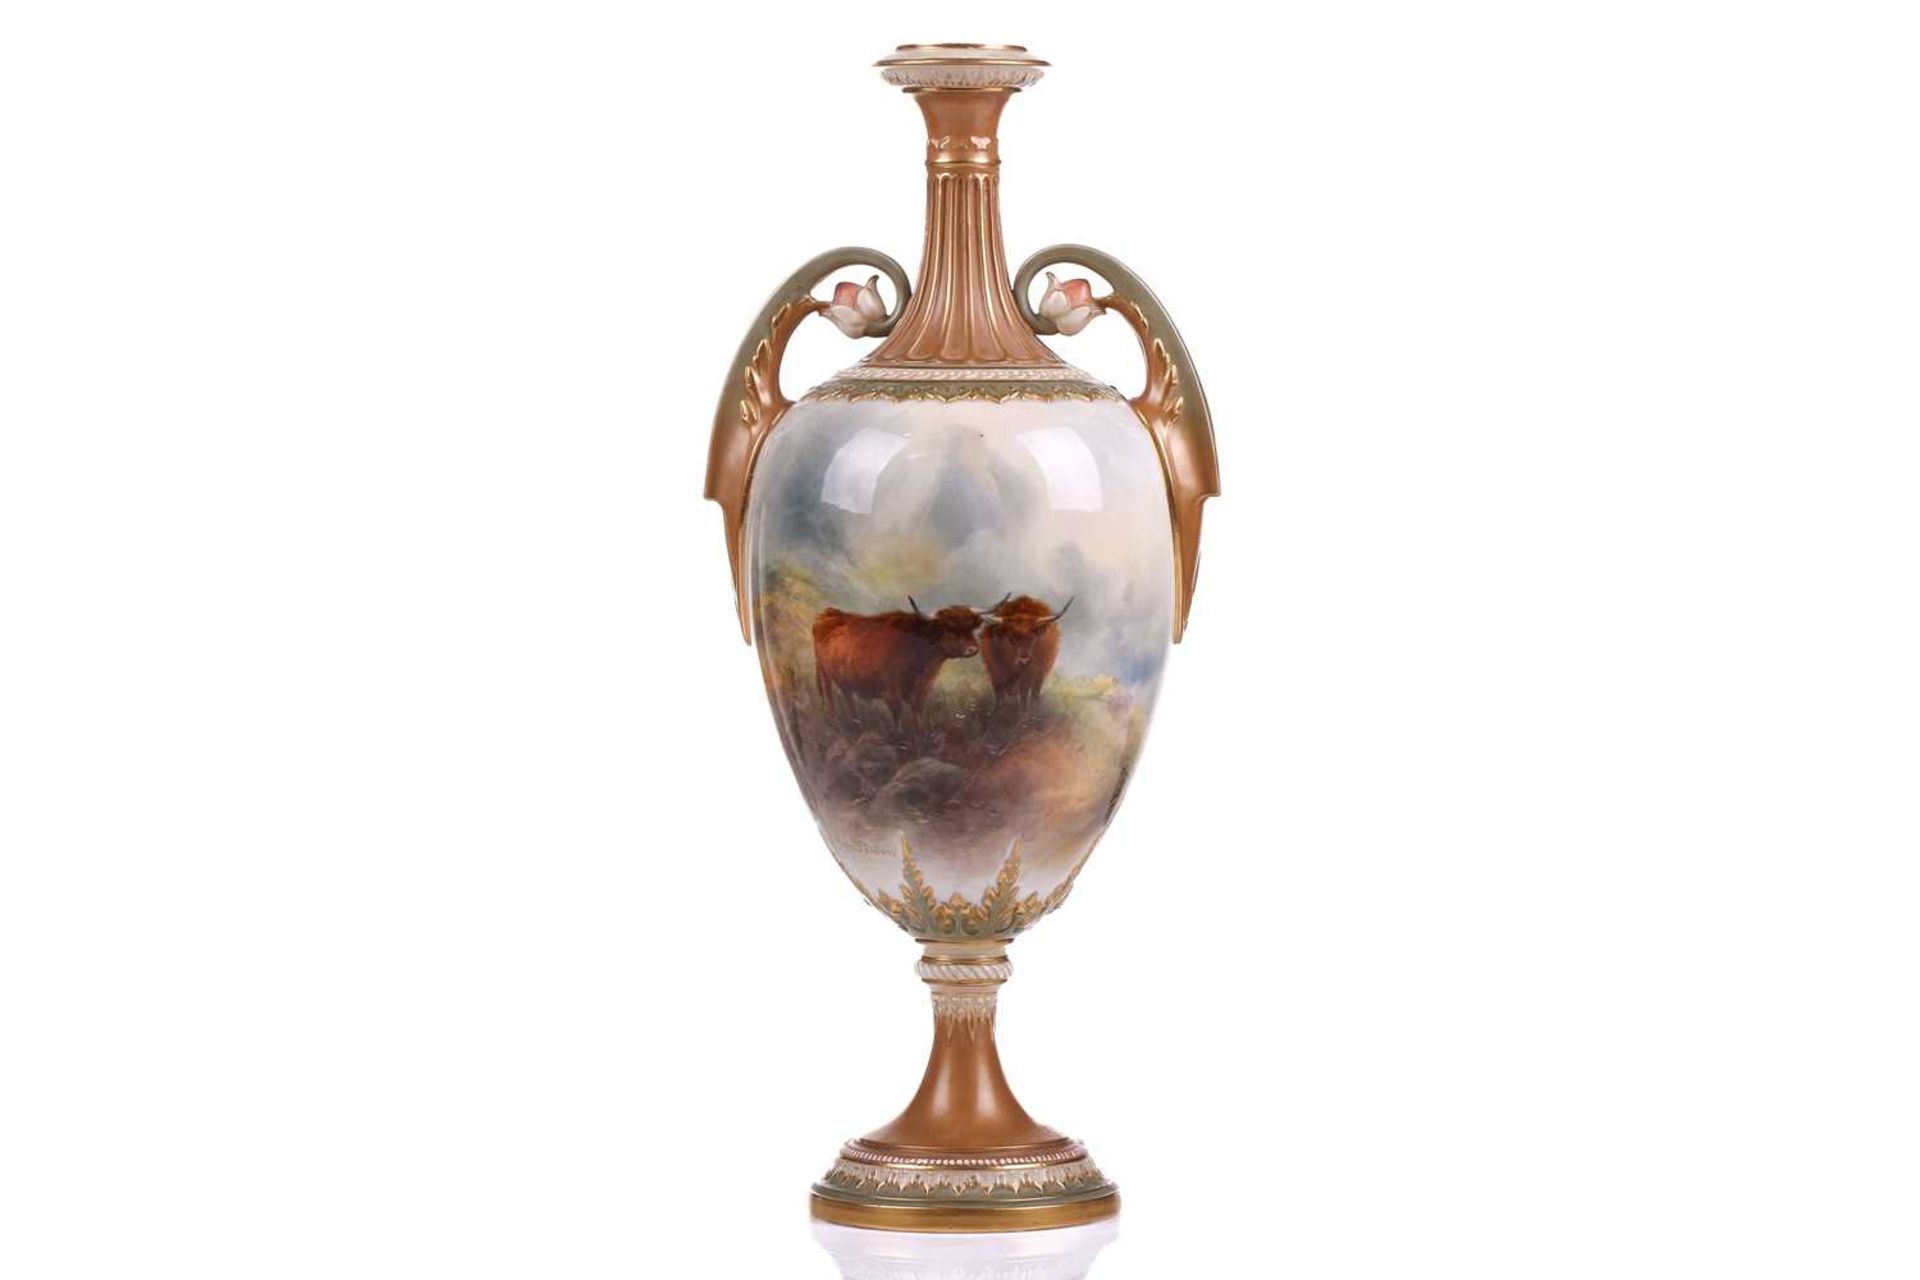 A John Stinton painted Royal Worcester oviform vase (apparently lacking cover), bearing a hand-